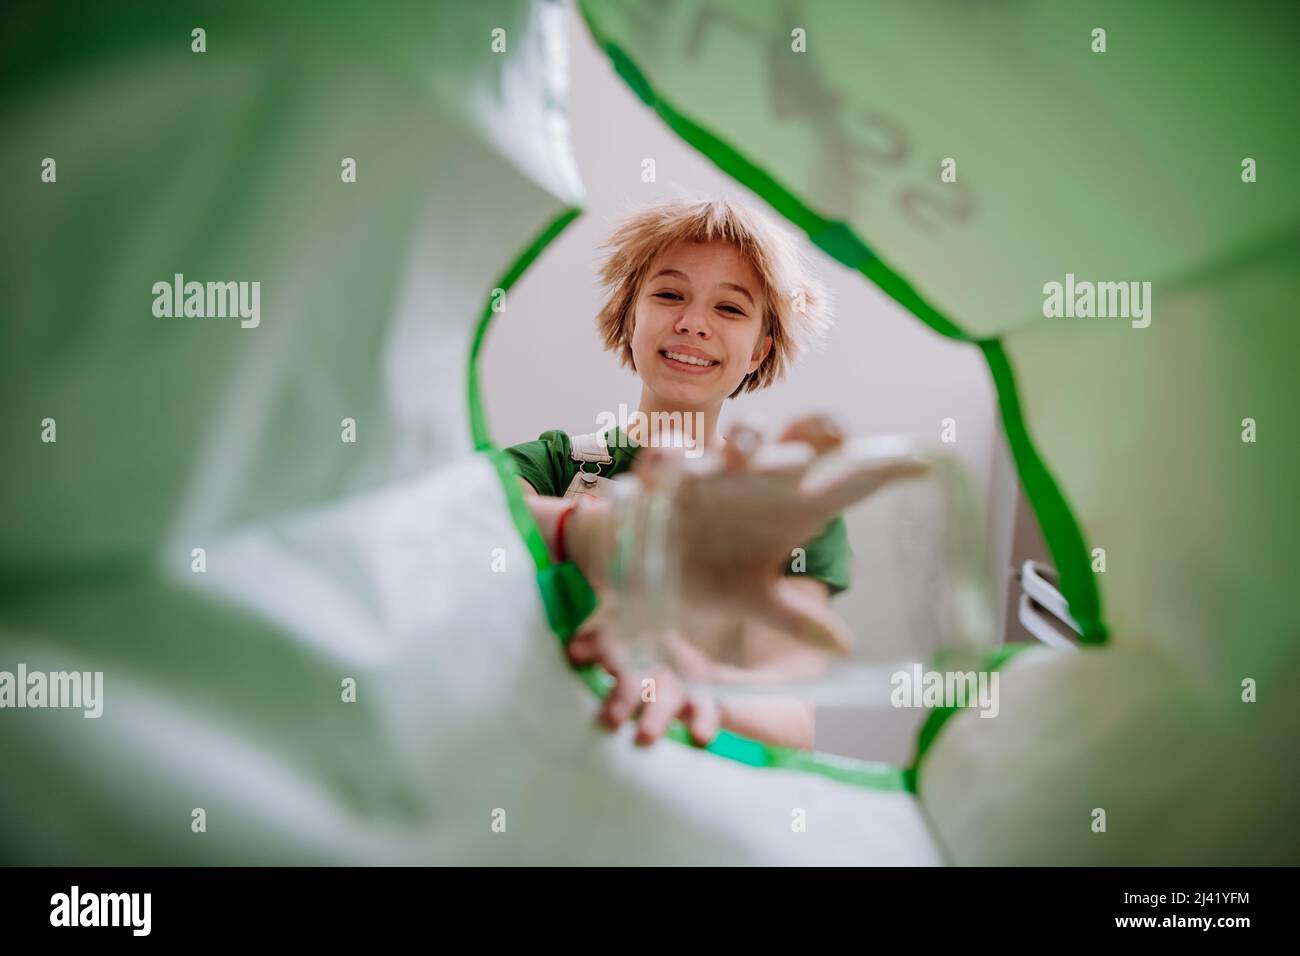 Image from inside green recycling bag of girl throwing a glass bottle to recycle. Stock Photo